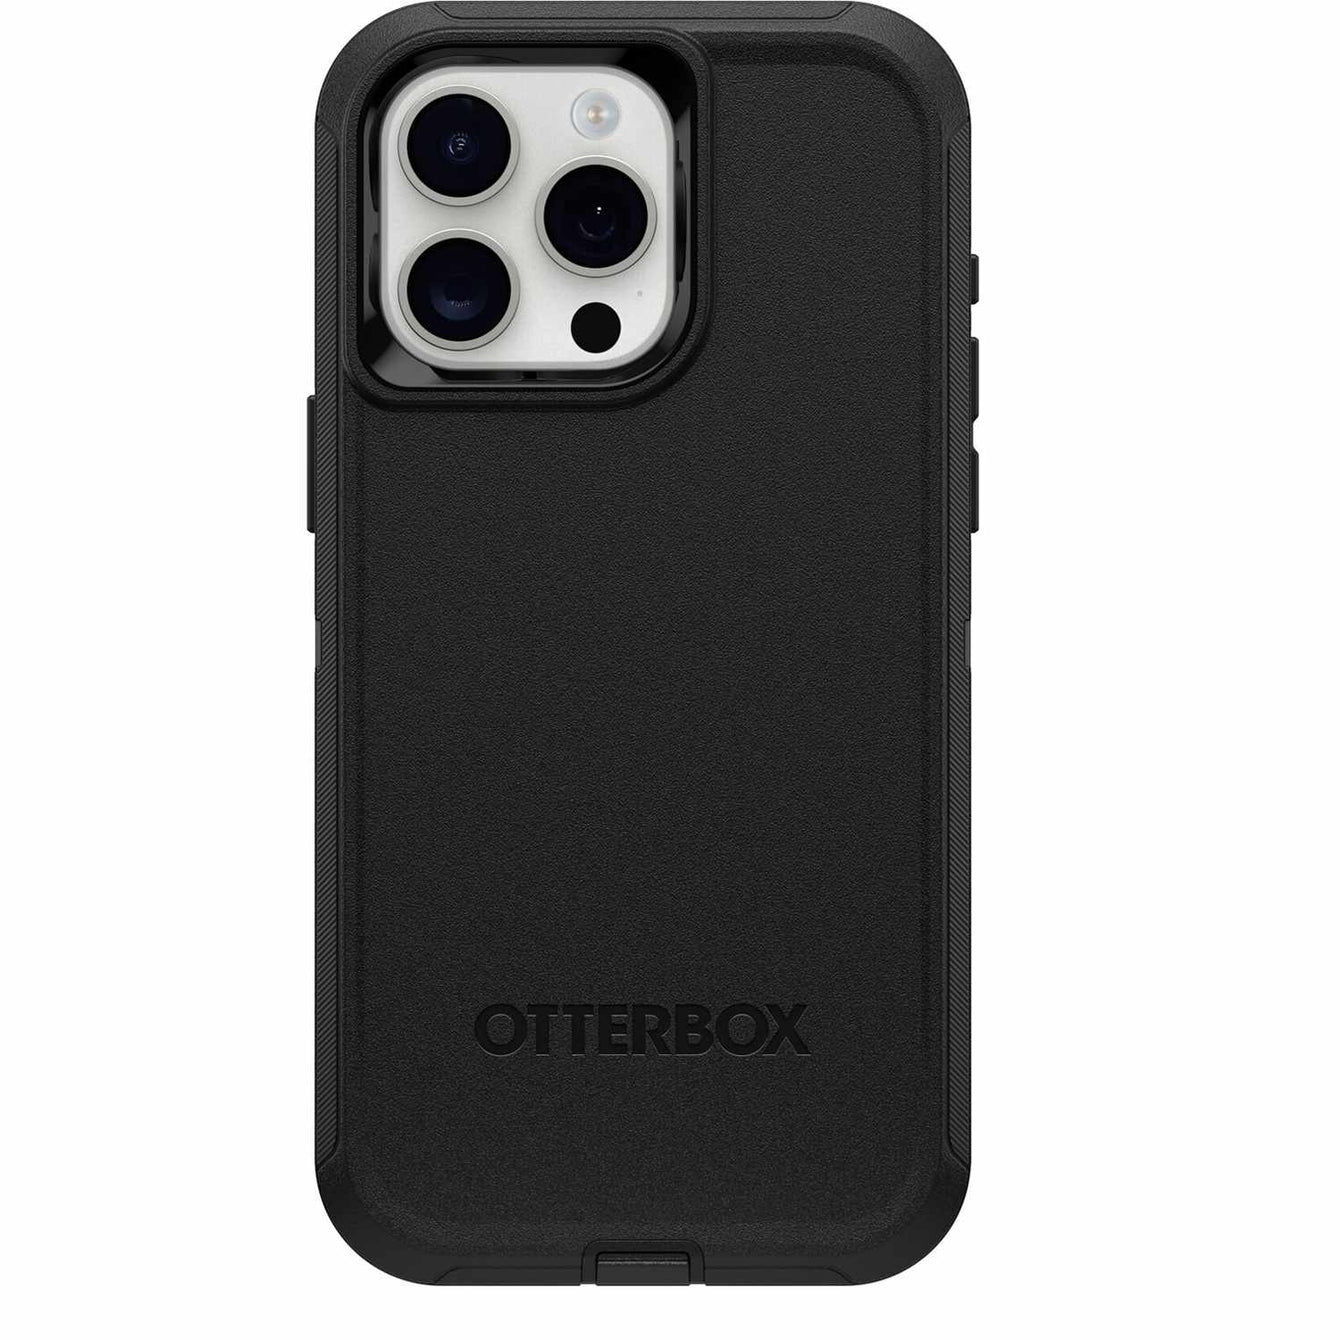 OtterBox Defender Case for iPhone 12 Pro Max Black